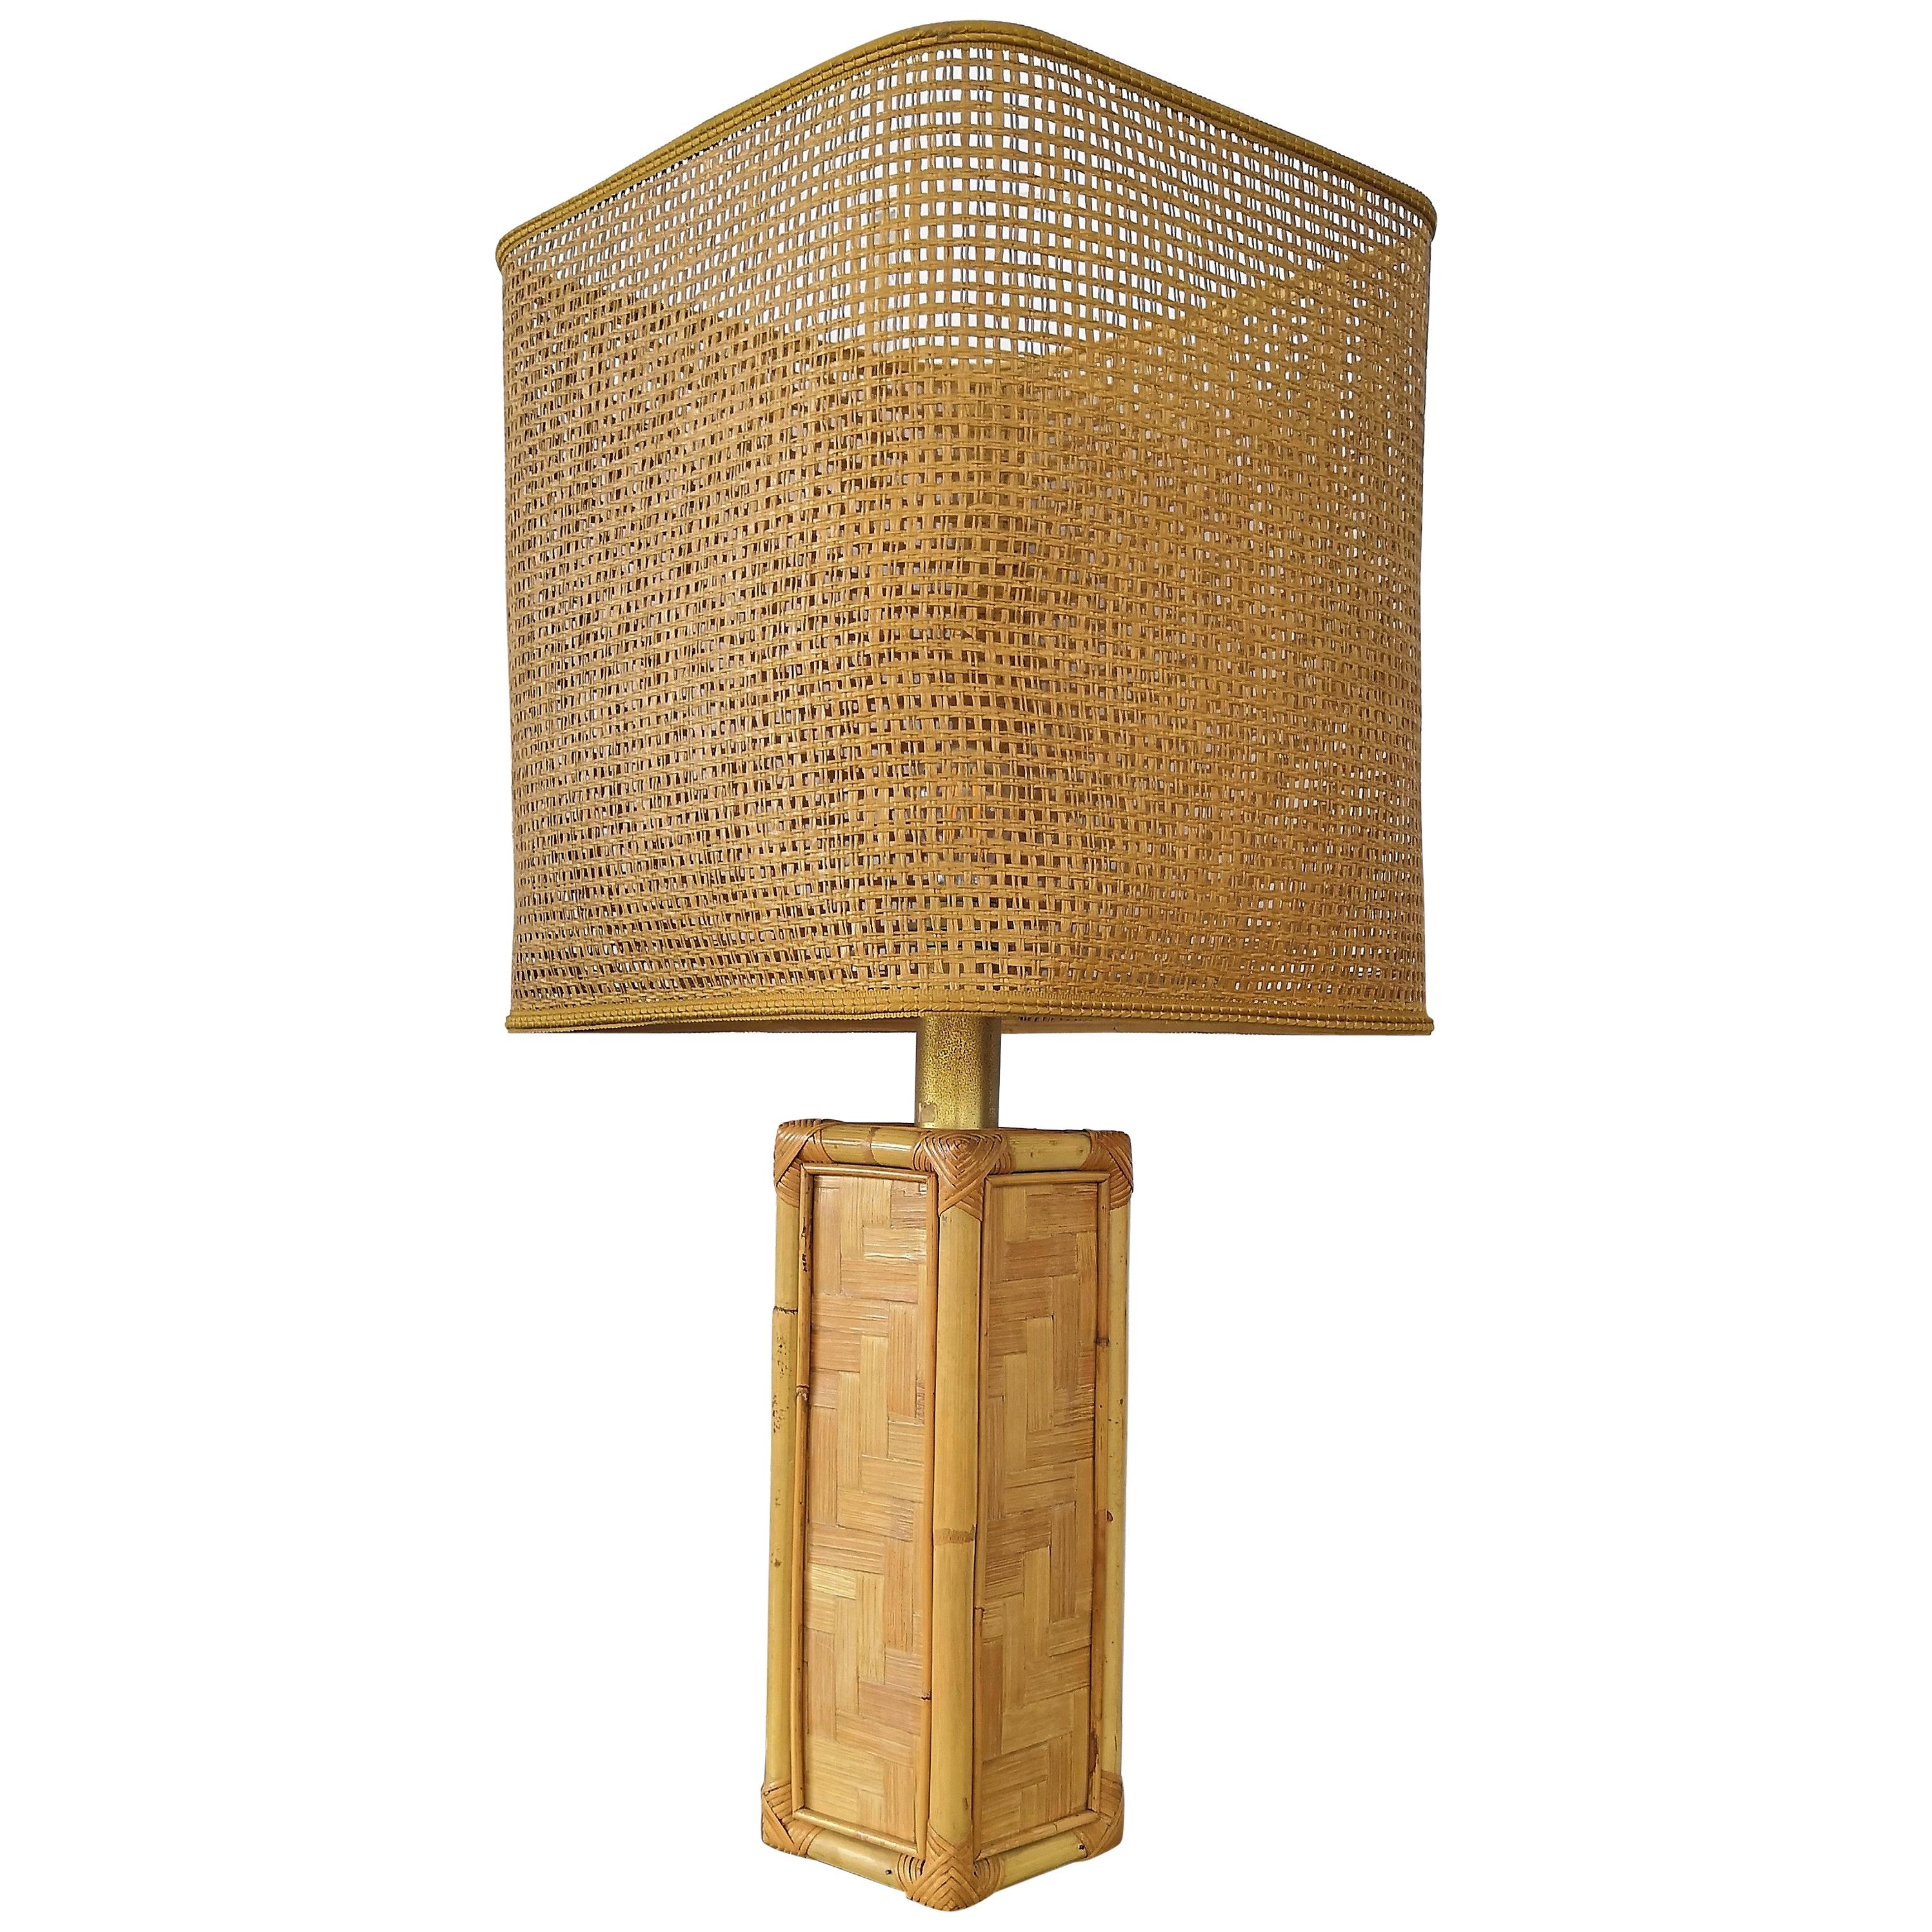 Midcentury Vintage Italian Rattan Bamboo Cane and Brass Table Lamp